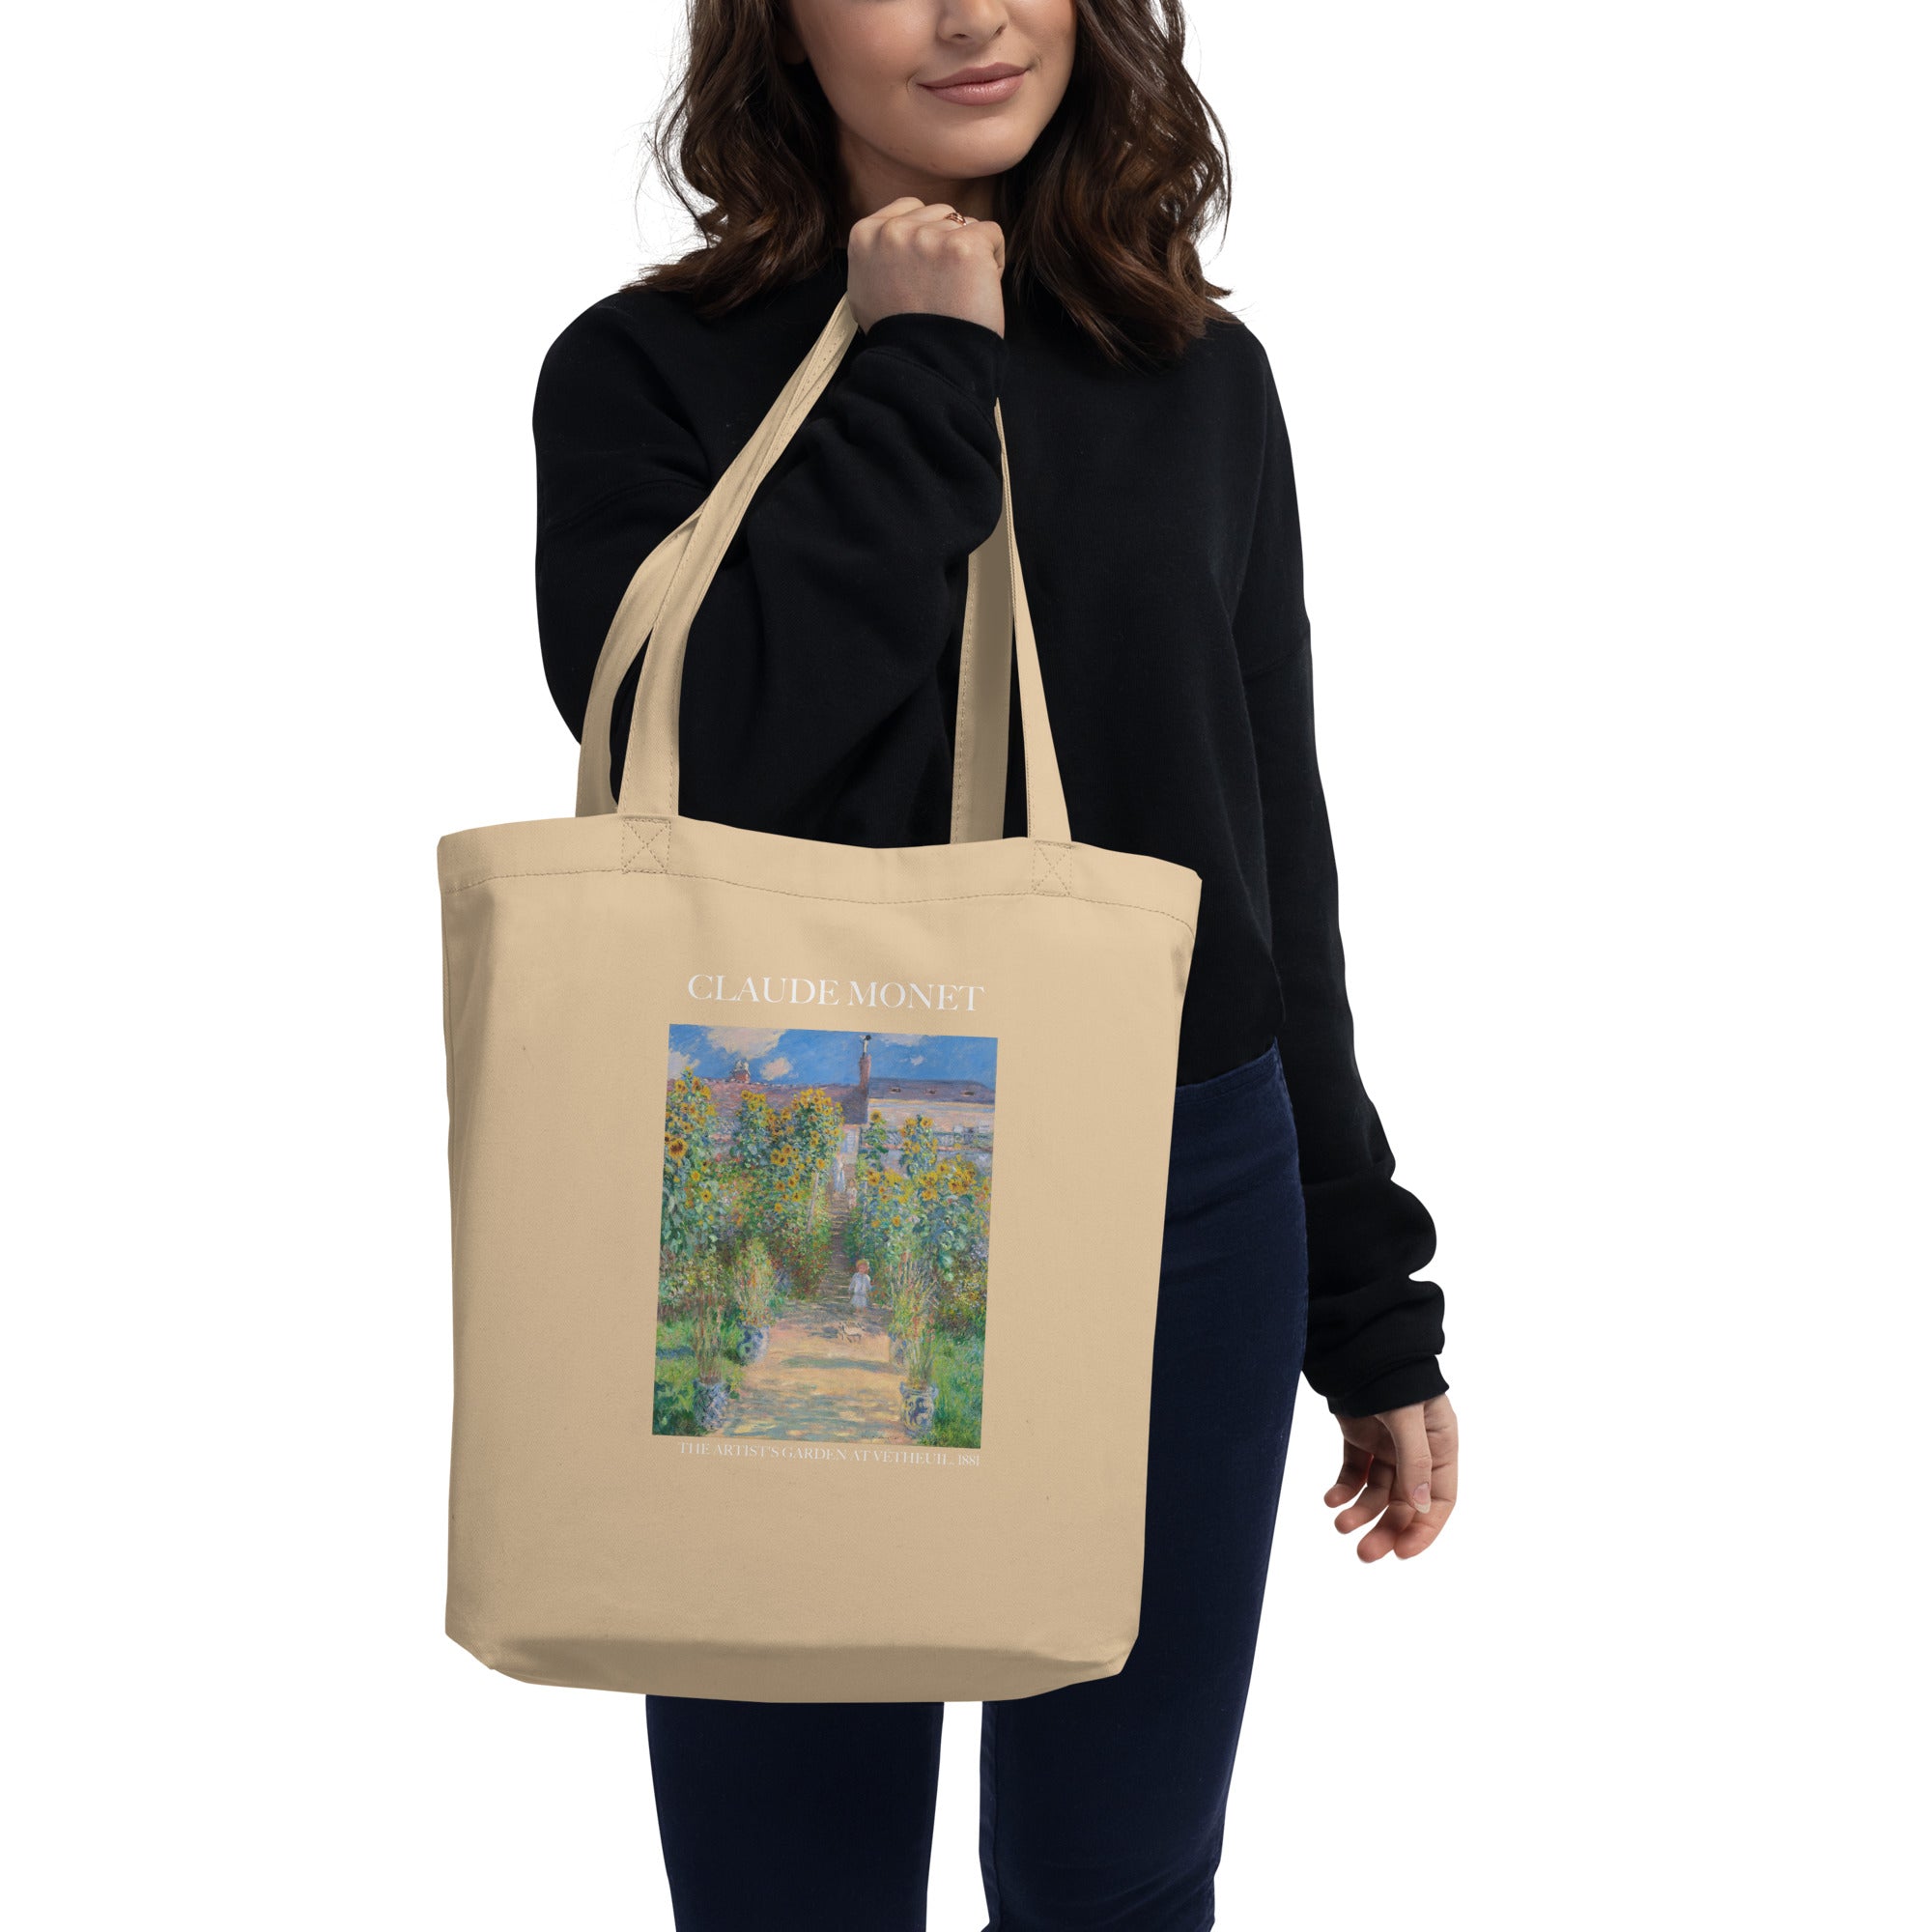 Claude Monet 'The Artist's Garden at Vétheuil' Famous Painting Totebag | Eco Friendly Art Tote Bag